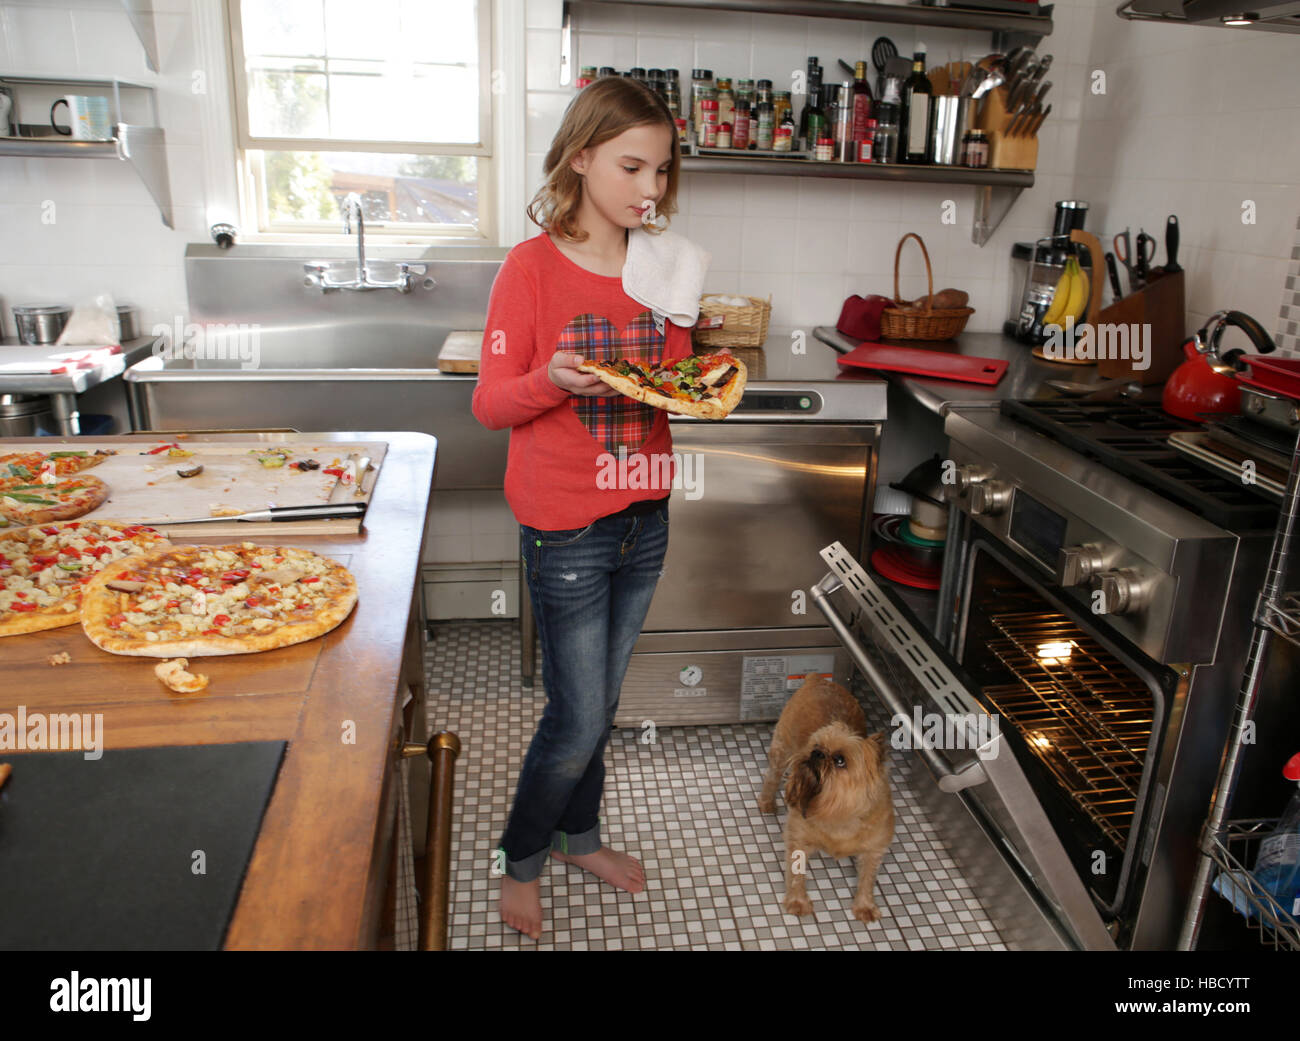 Young girl in kitchen, putting pizza in oven Stock Photo